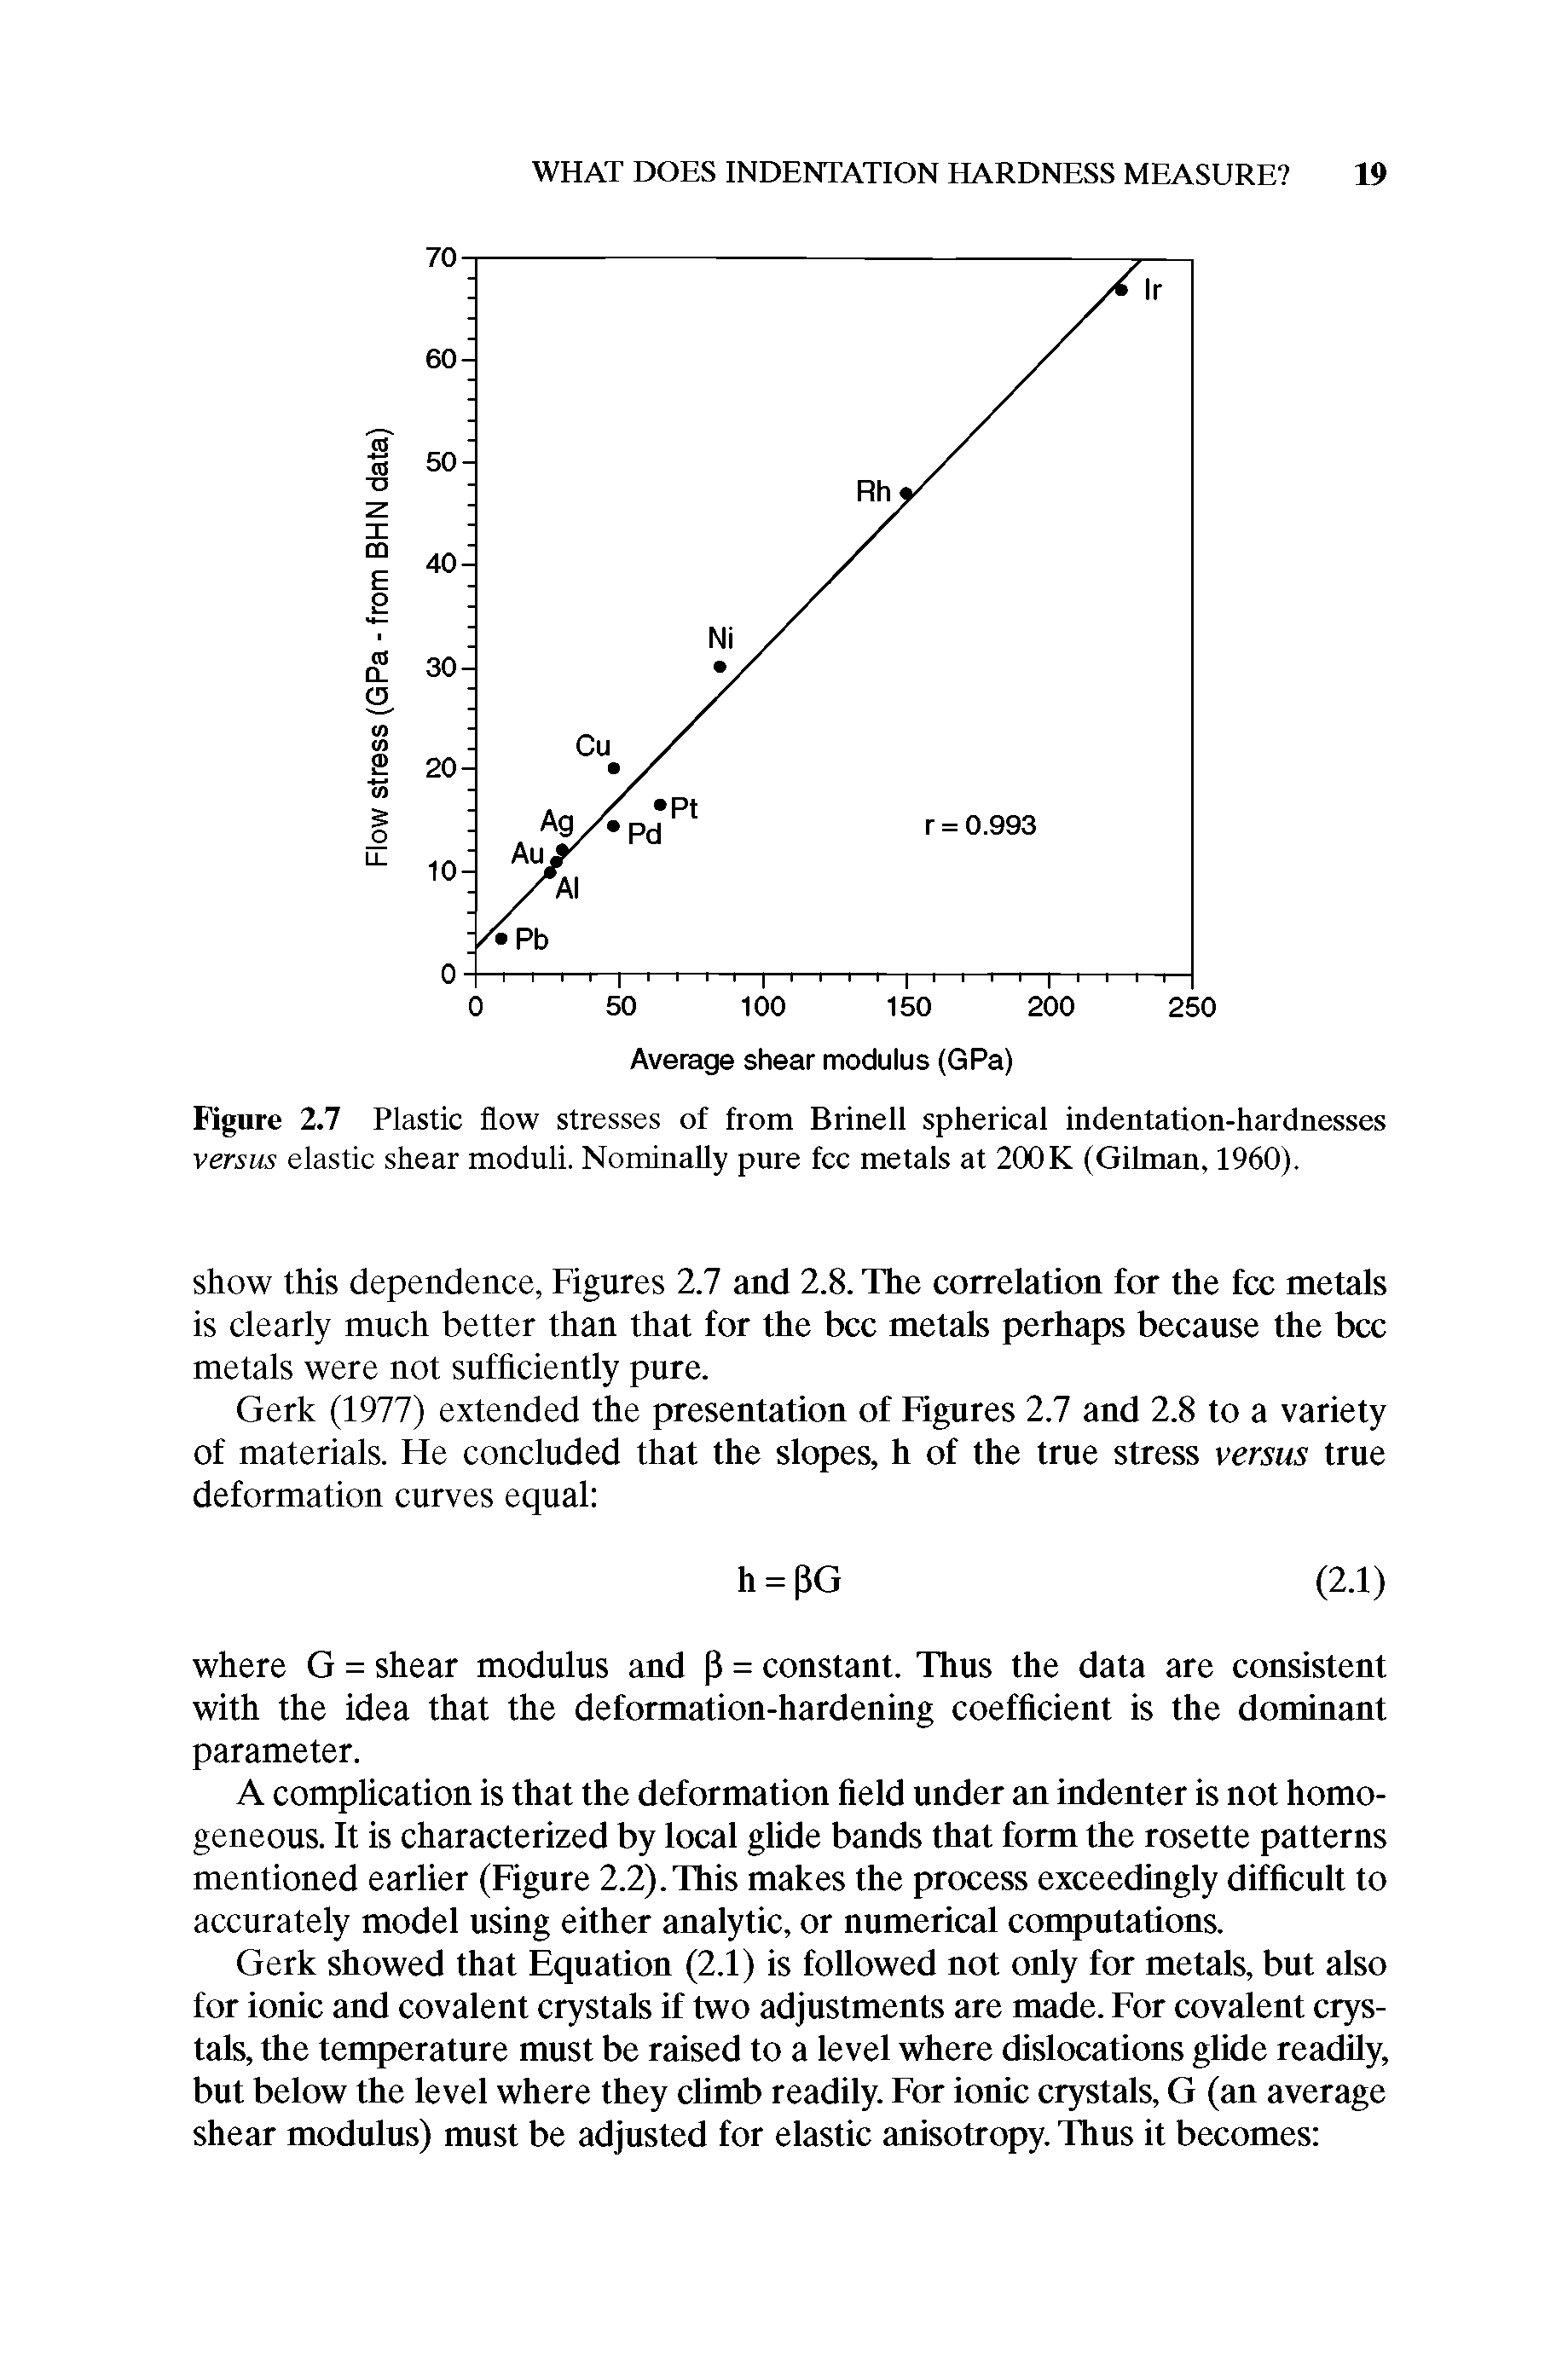 Figure 2.7 Plastic flow stresses of from Brinell spherical indentation-hardnesses versus elastic shear moduli. Nominally pure fee metals at 200K (Gilman, 1960).